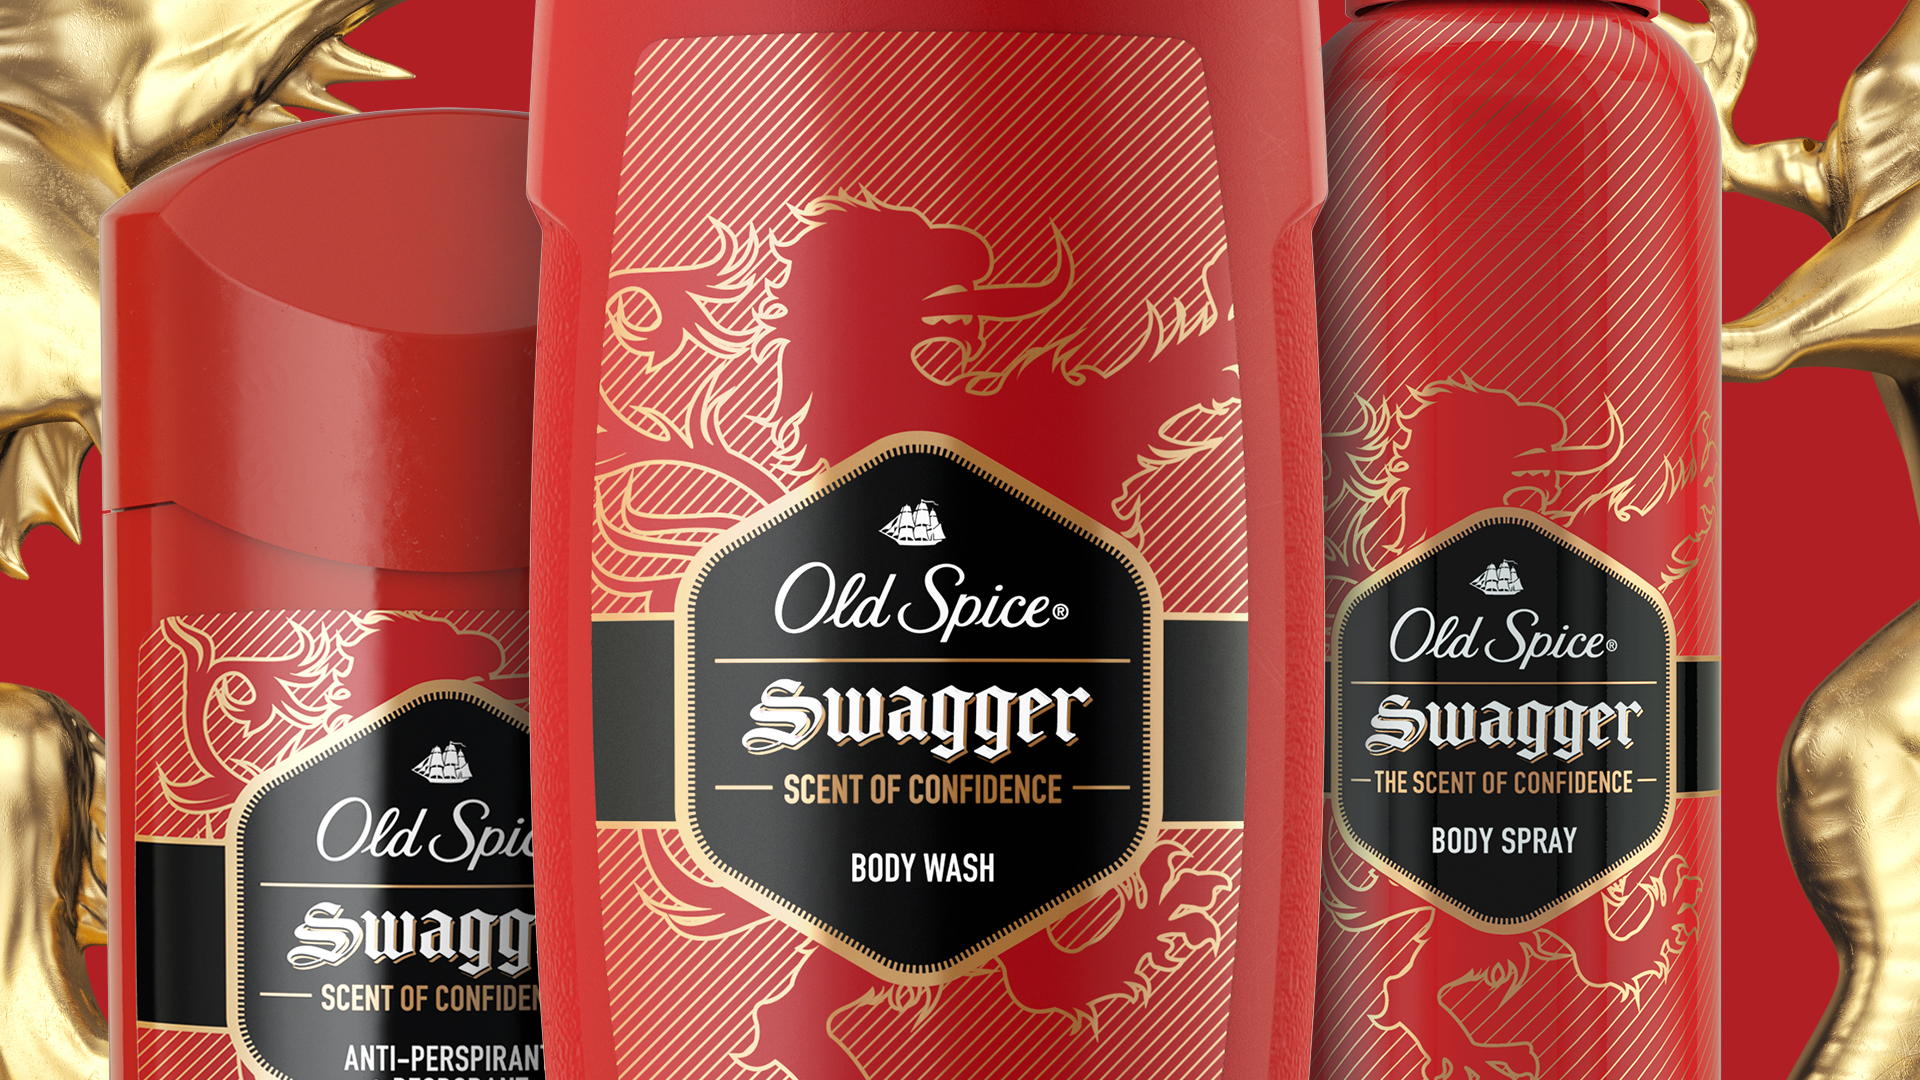 Old Spice Swagger Packaging